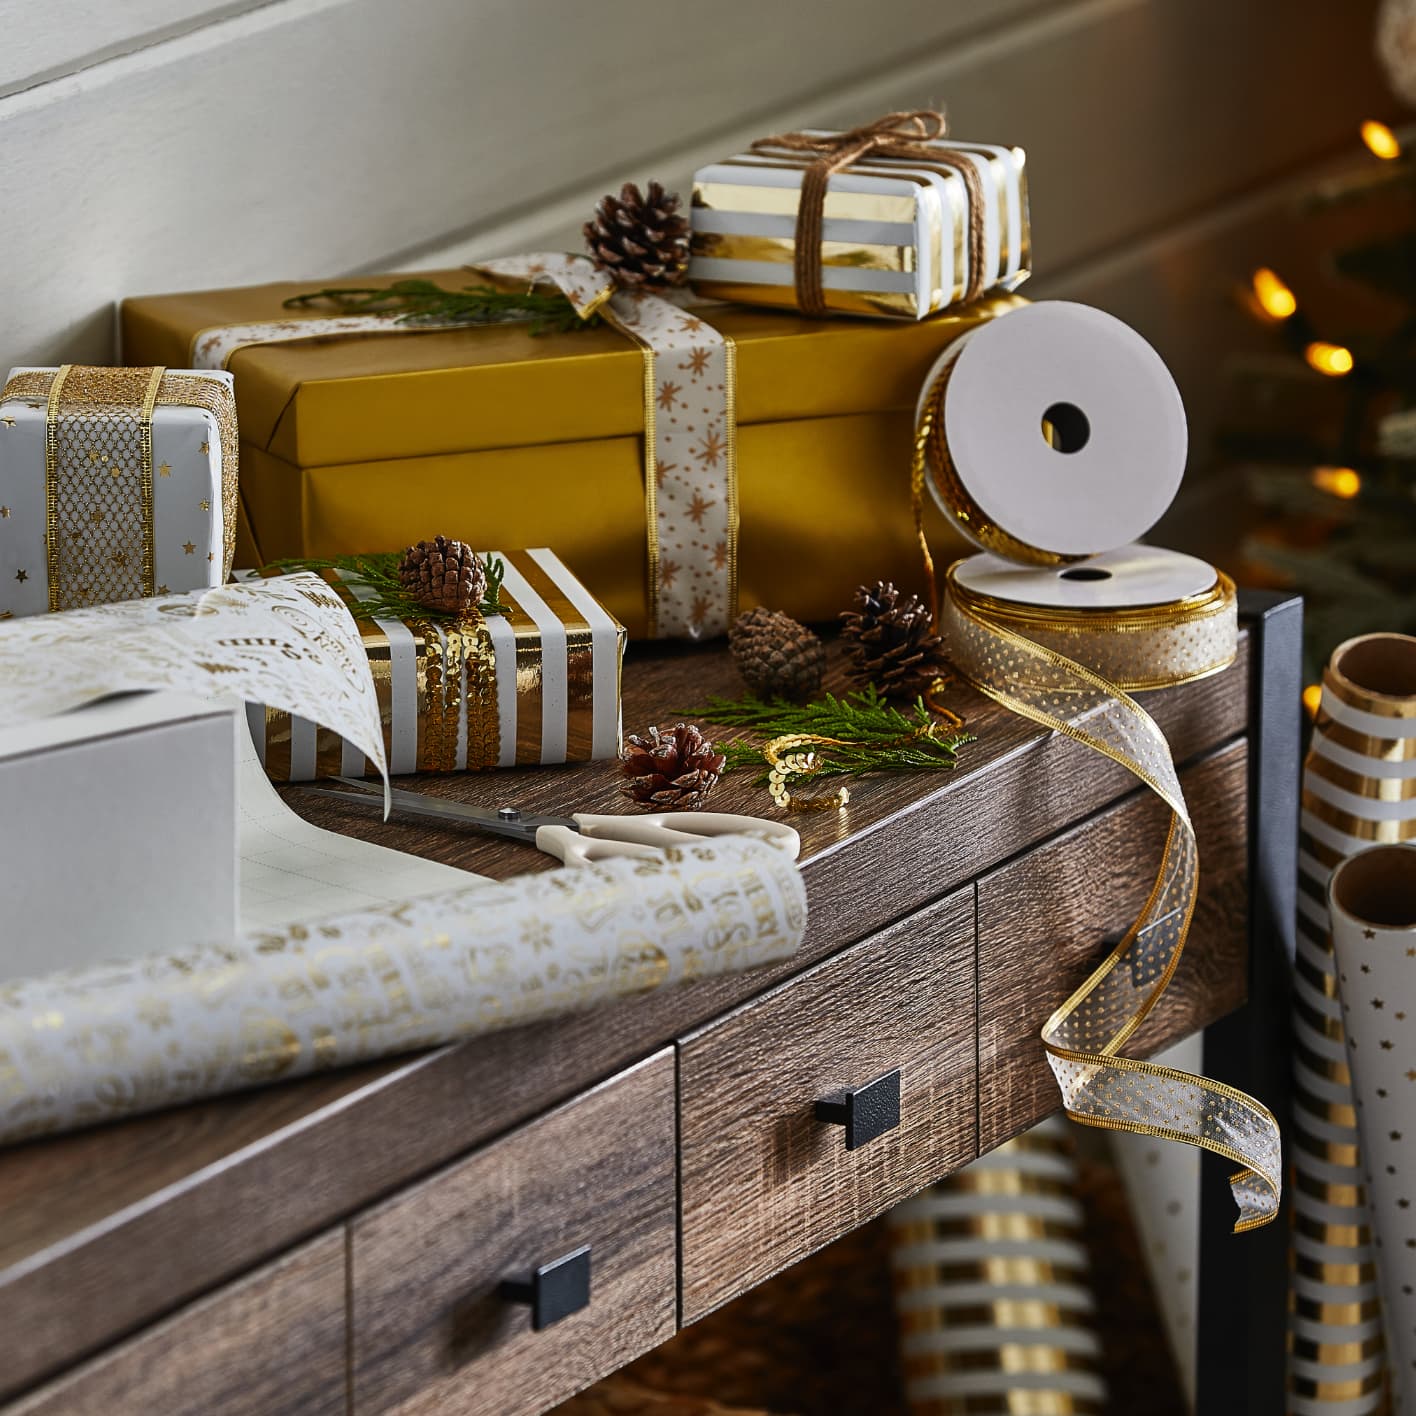 Gold and white gift wrapping accessories on a table